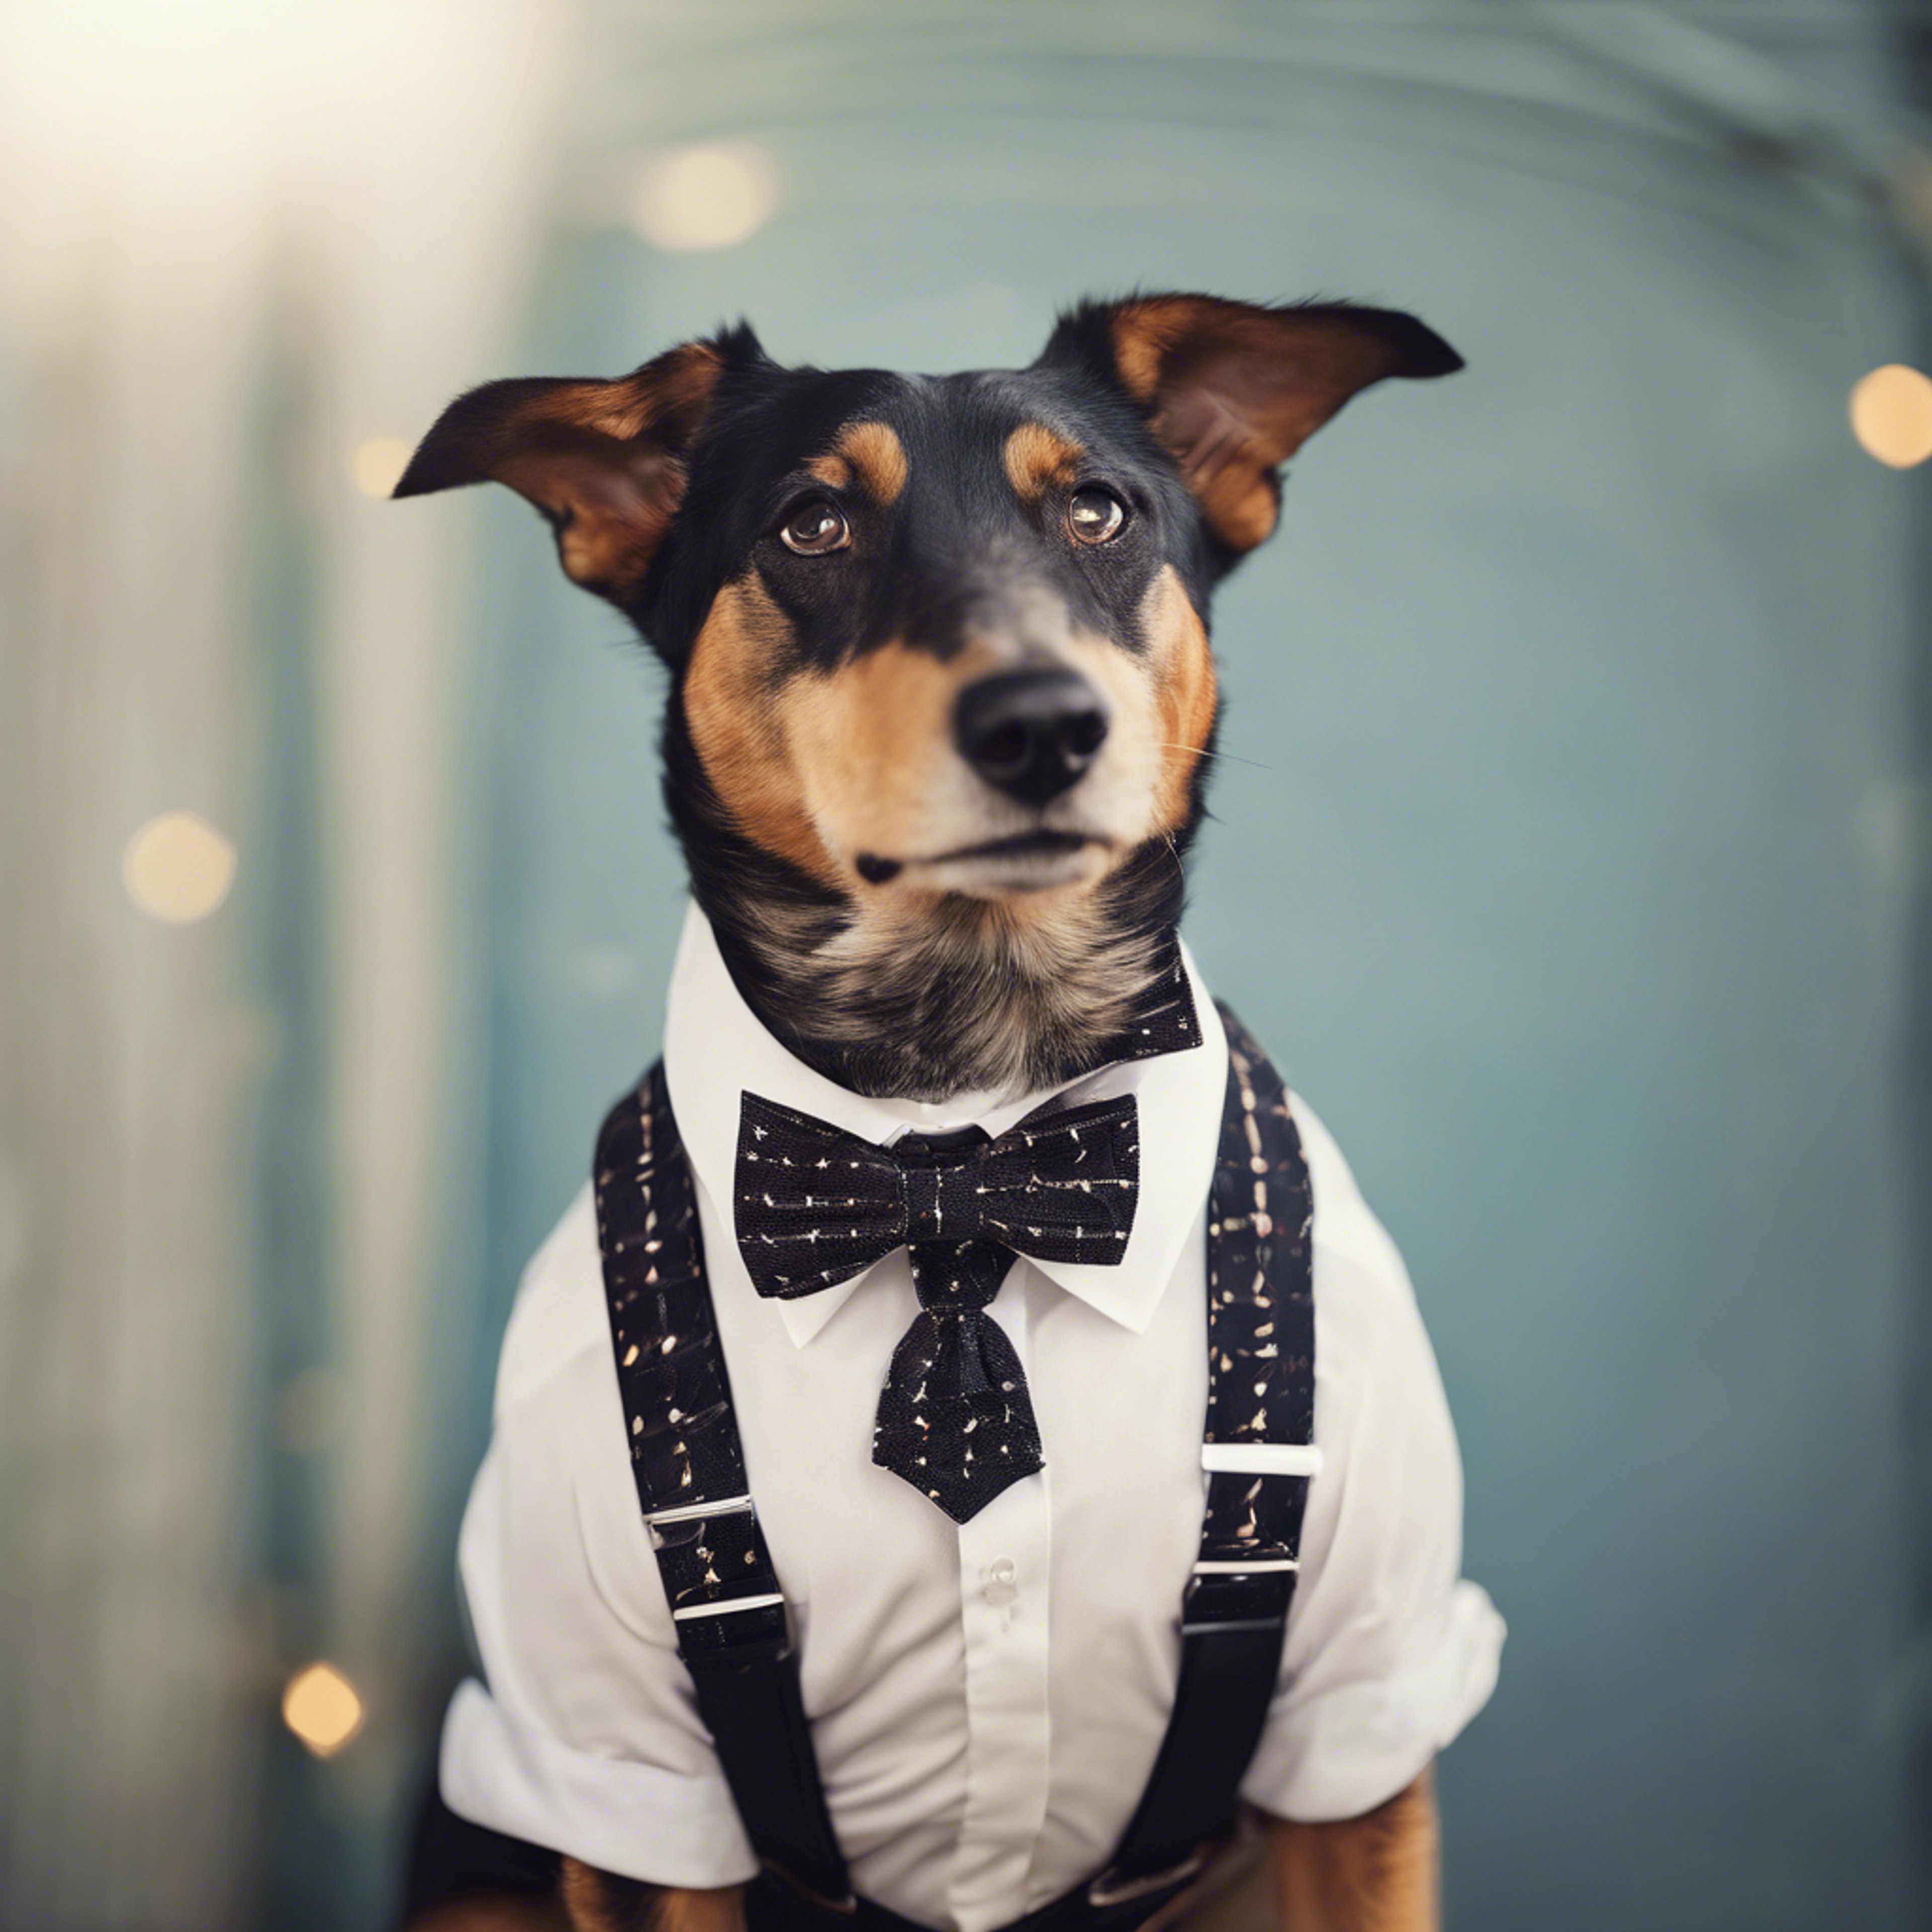 A dapper dog dressed in a cute retro-style outfit, featuring suspenders and bow tie. Papel de parede[69a1531fb80543609416]